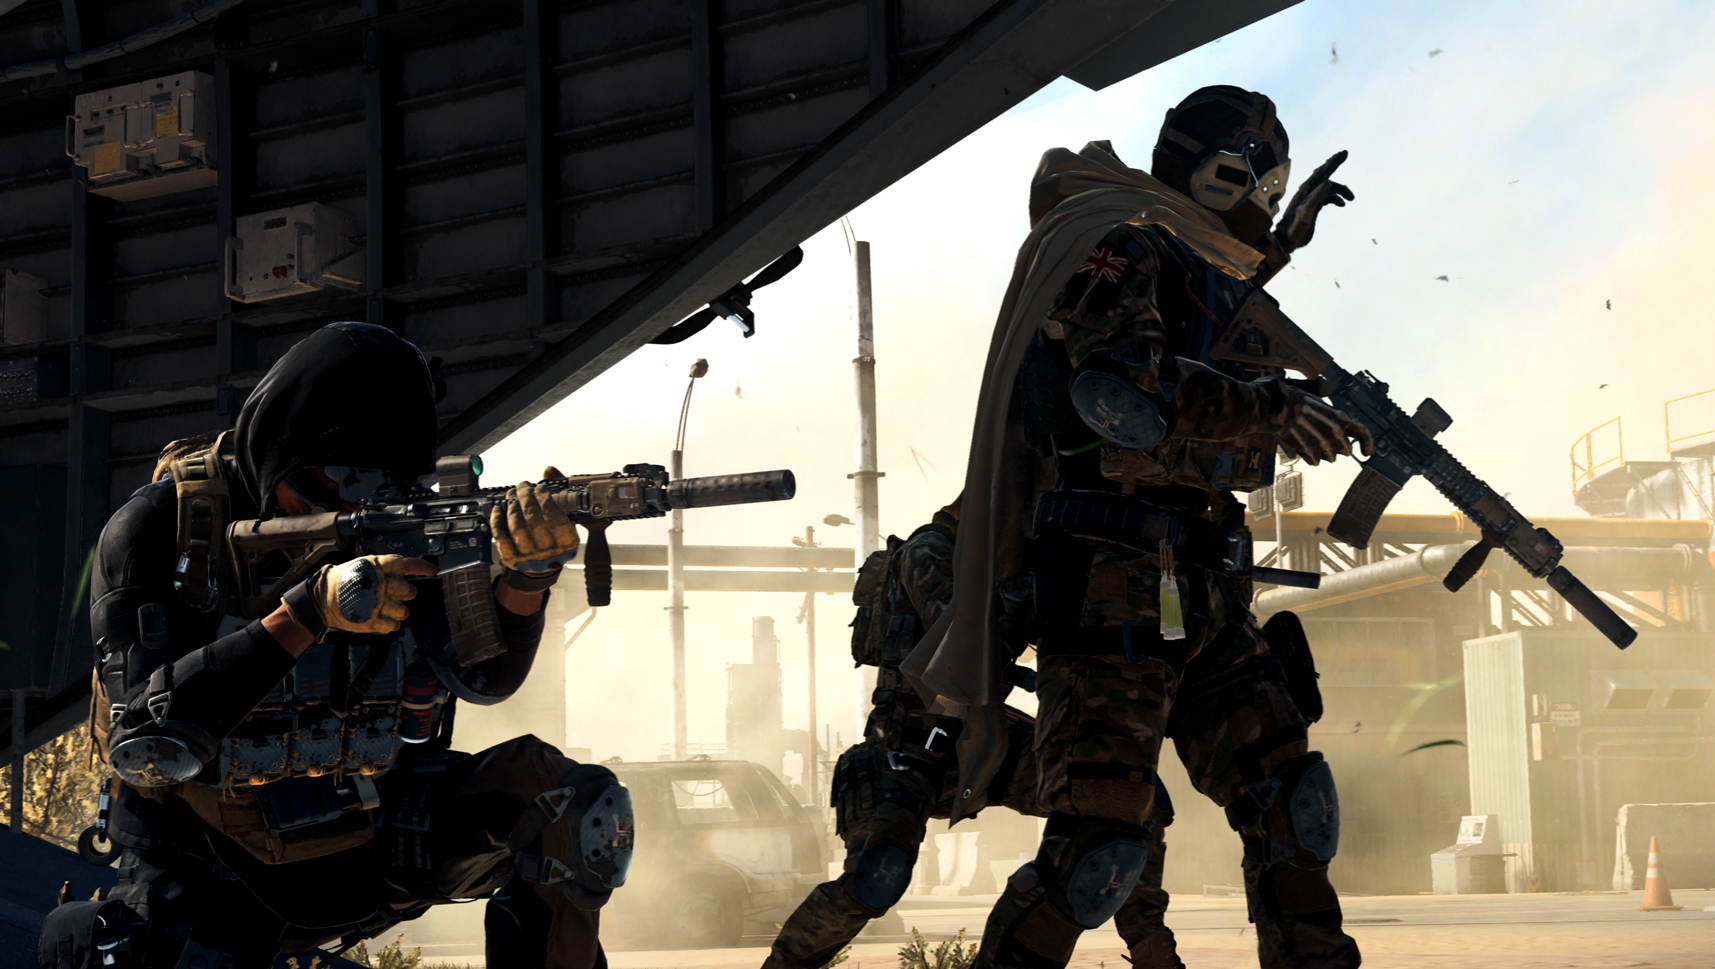 Characters exiting aircraft in Warzone 2.0.